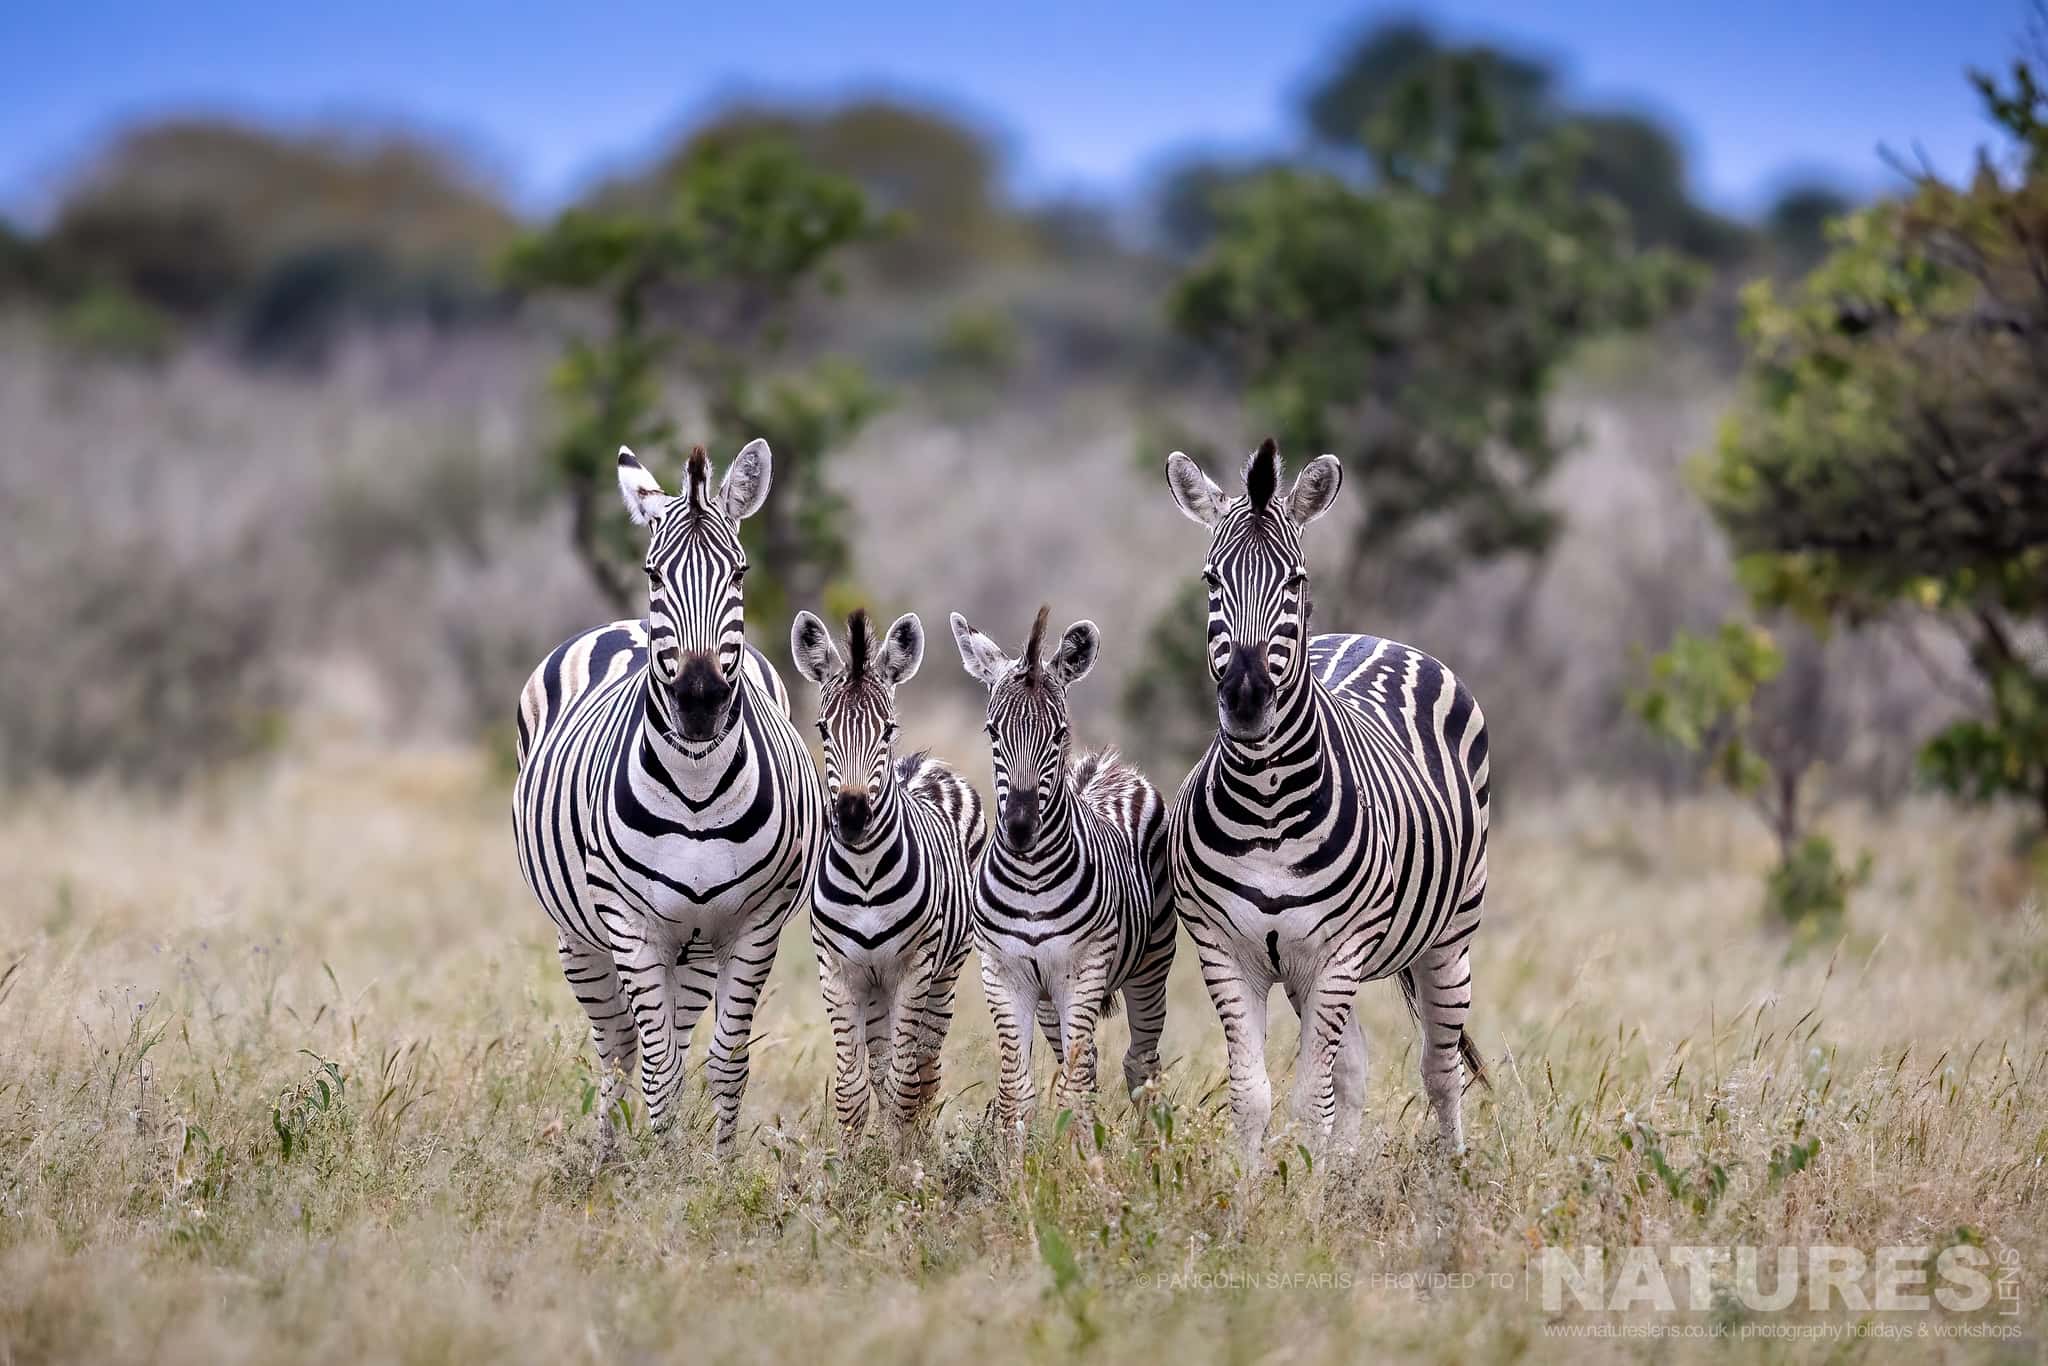 A Quartet Of Zebra Typical Of The Kind Of Image We Hope To Capture During The Wildlife Of The Chobe River & Dinaka Private Conservancy Photography Holiday